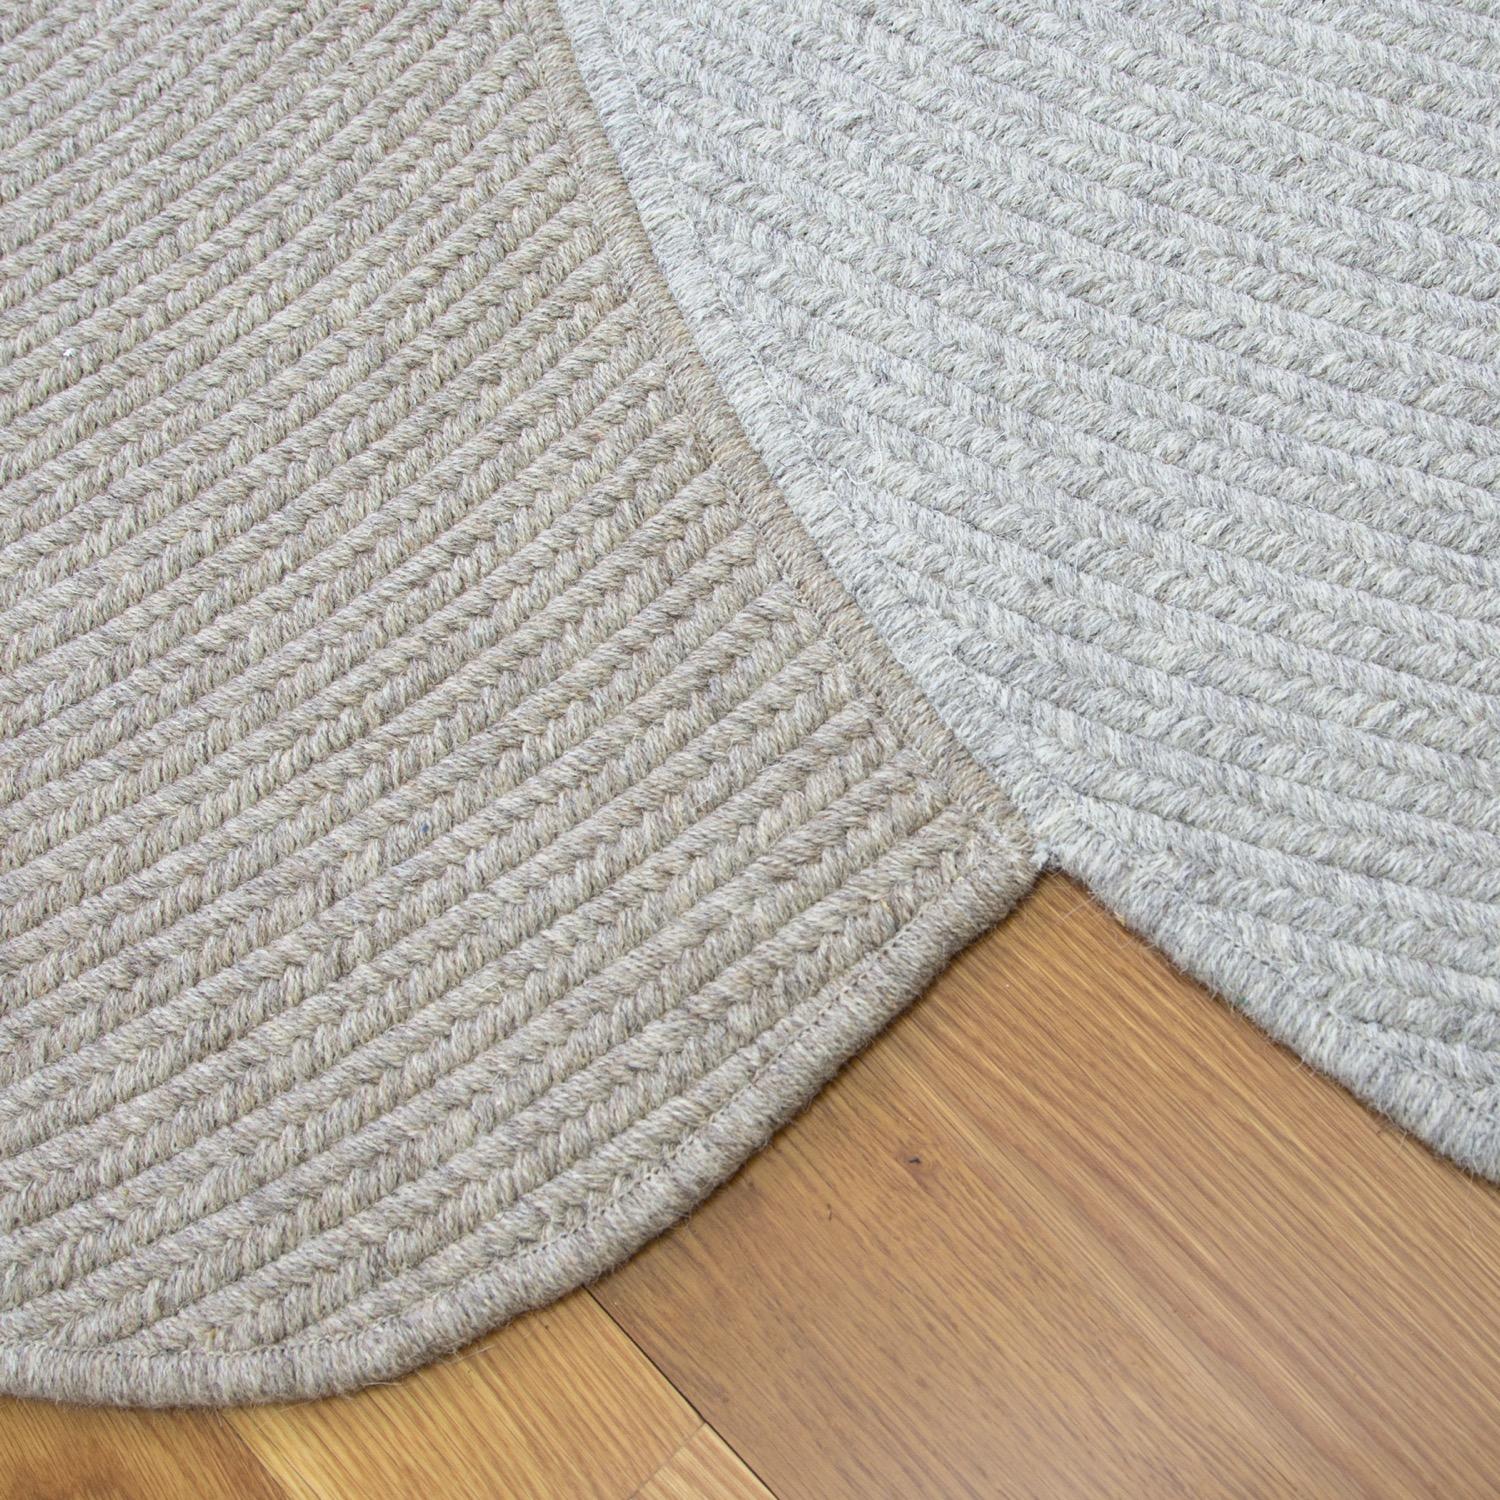 Riff Rug from Souda, 4x6 ft, Natural Wool, Light Grey In New Condition For Sale In Brooklyn, NY